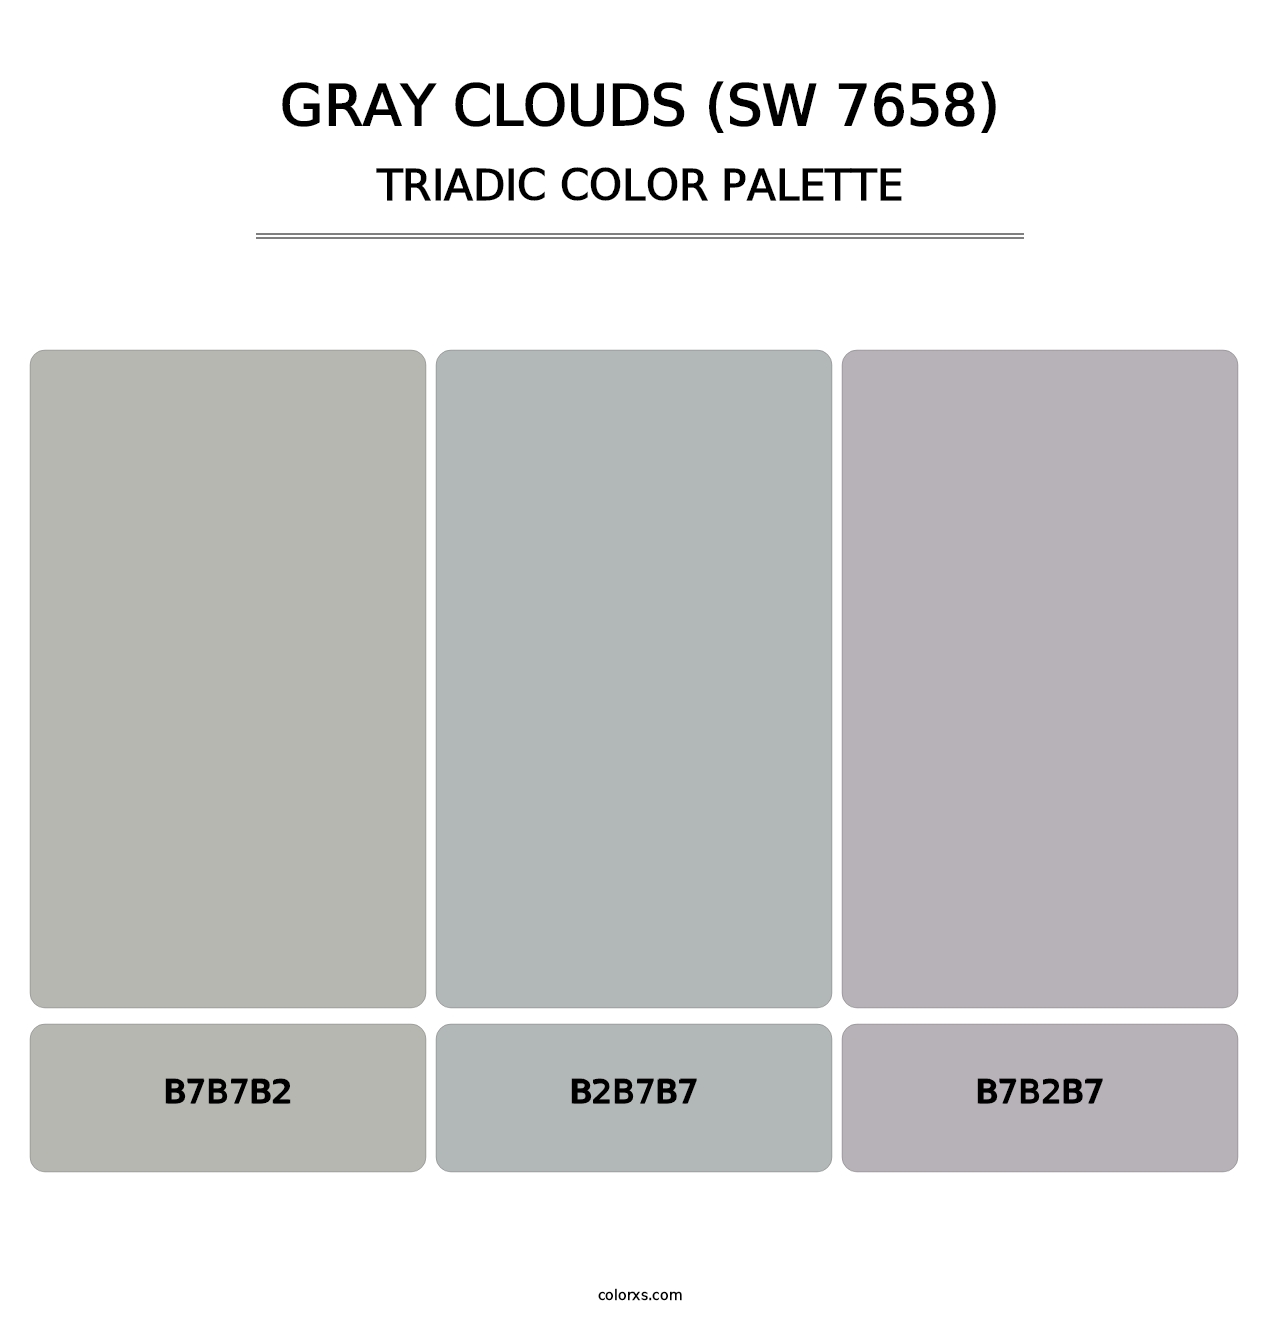 Gray Clouds (SW 7658) - Triadic Color Palette